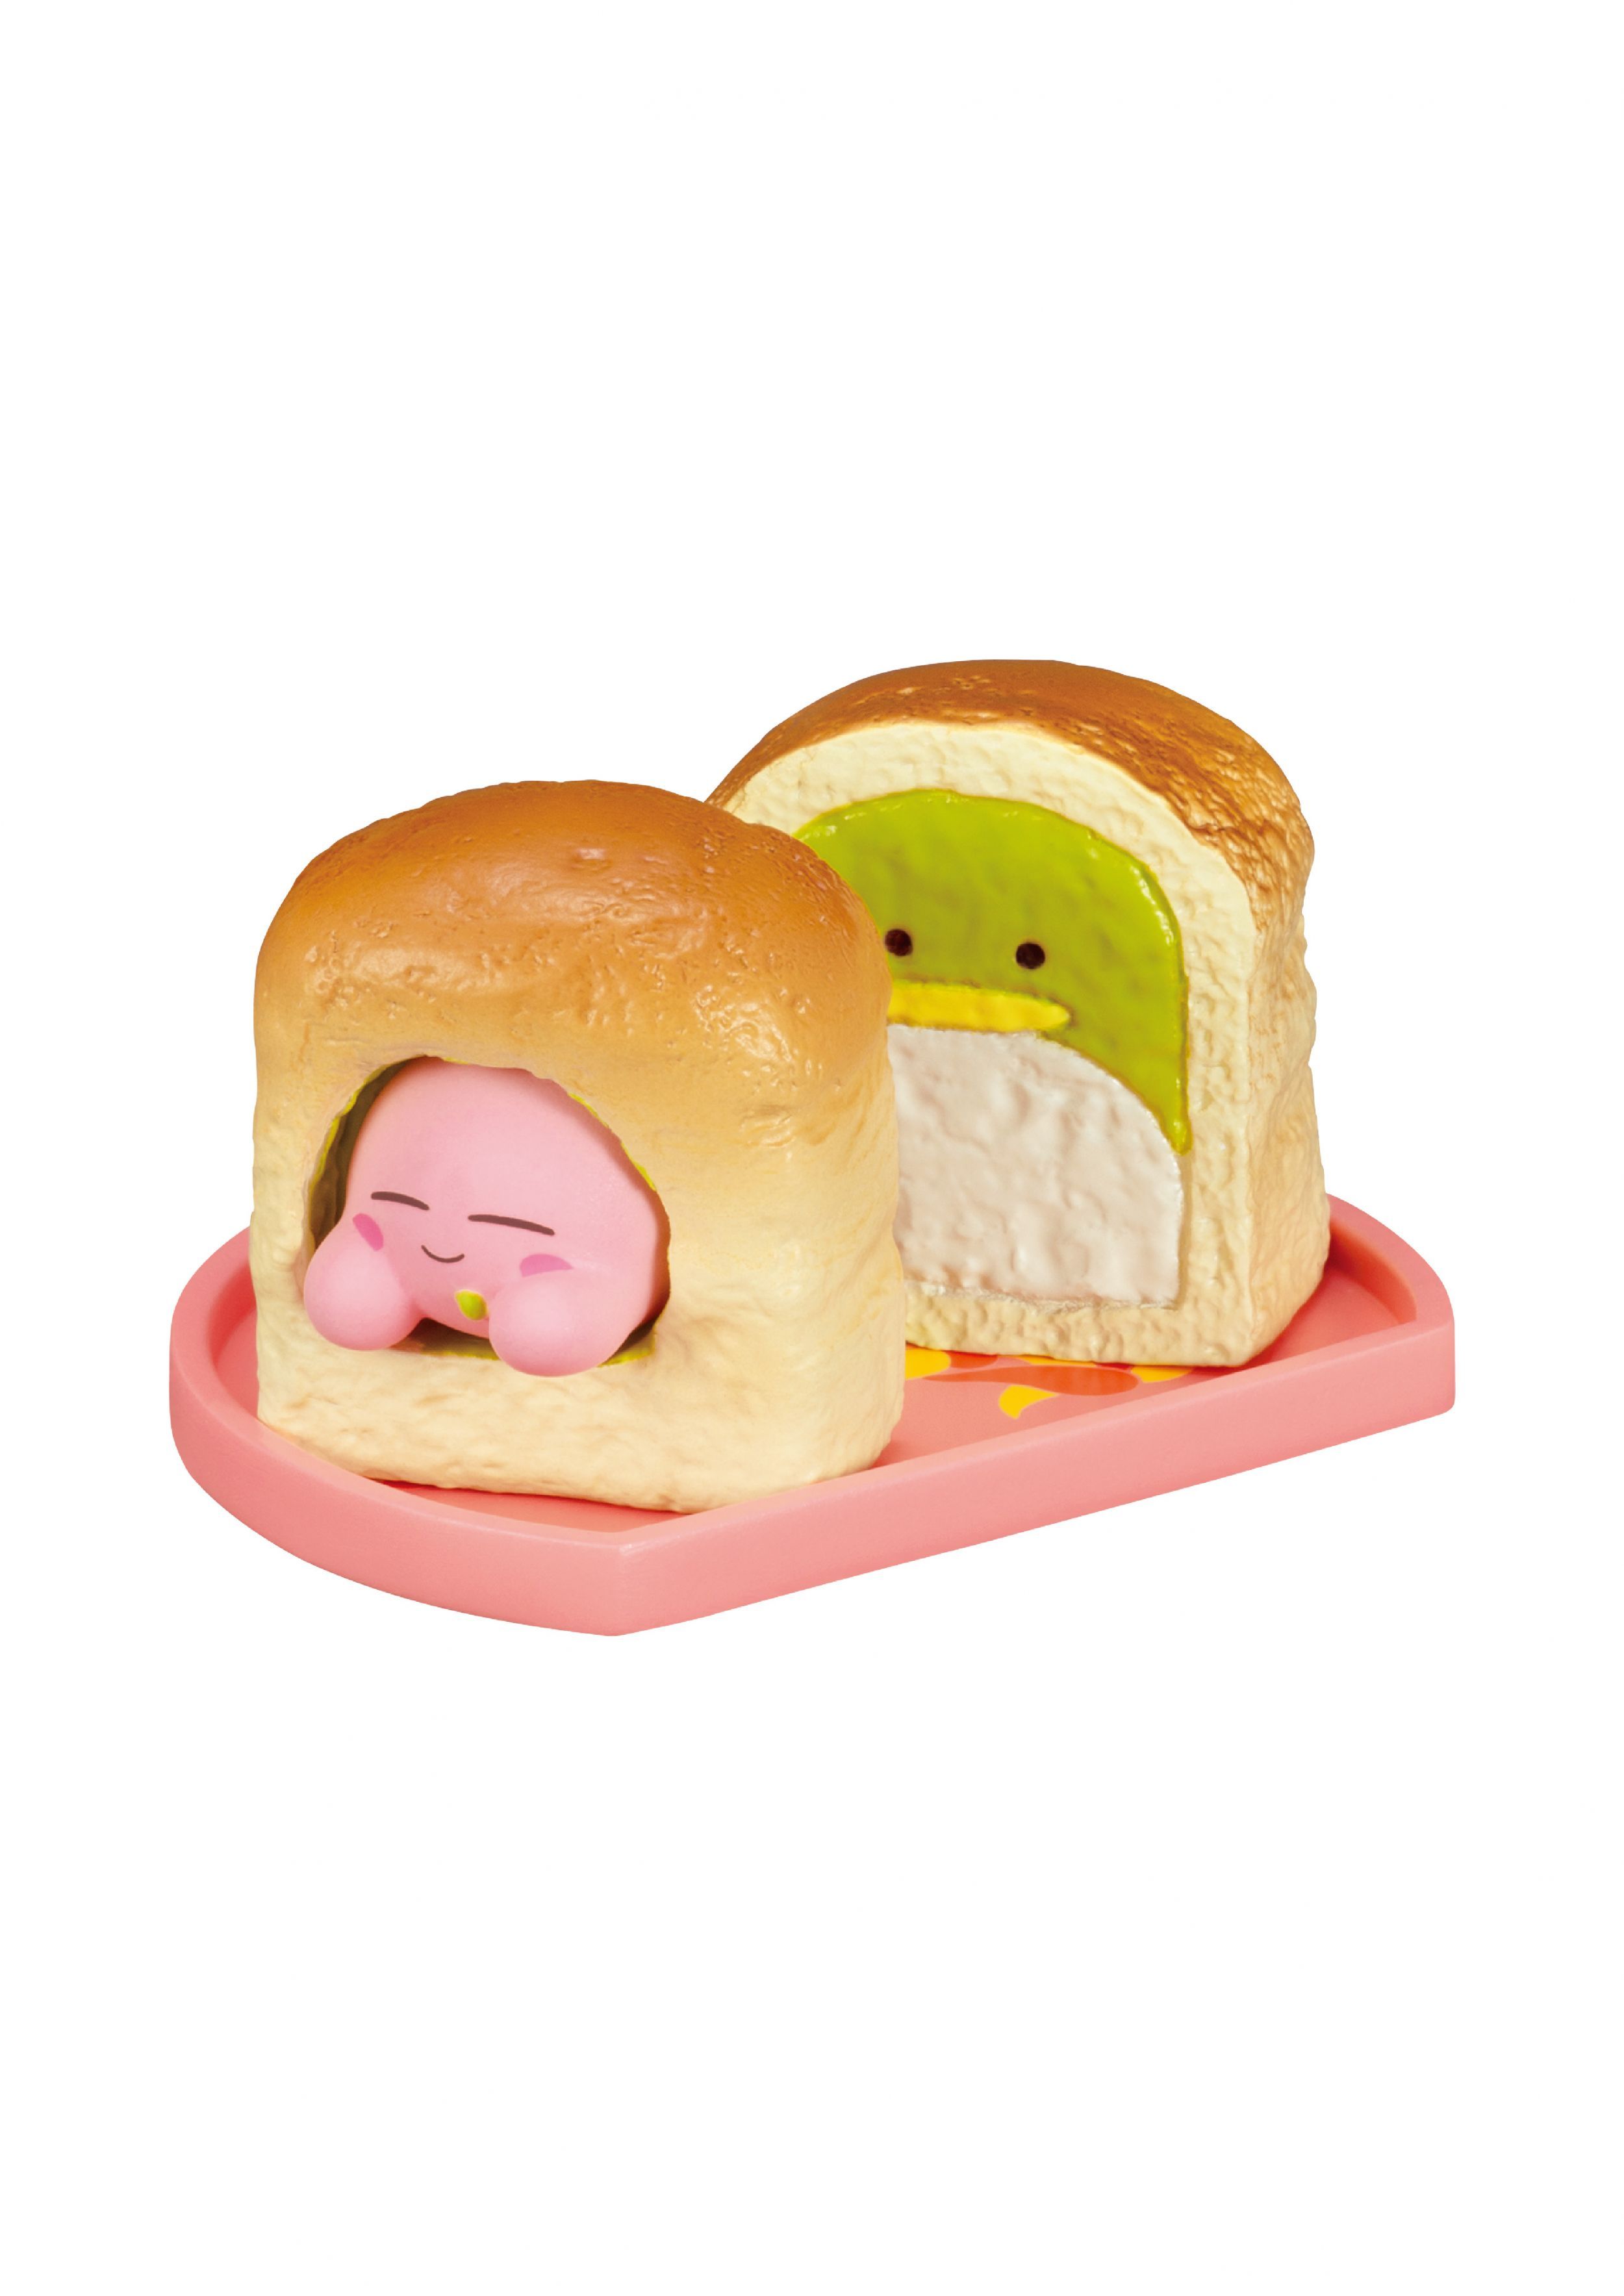 Kirby - Bakery Cafe Blind image count 7